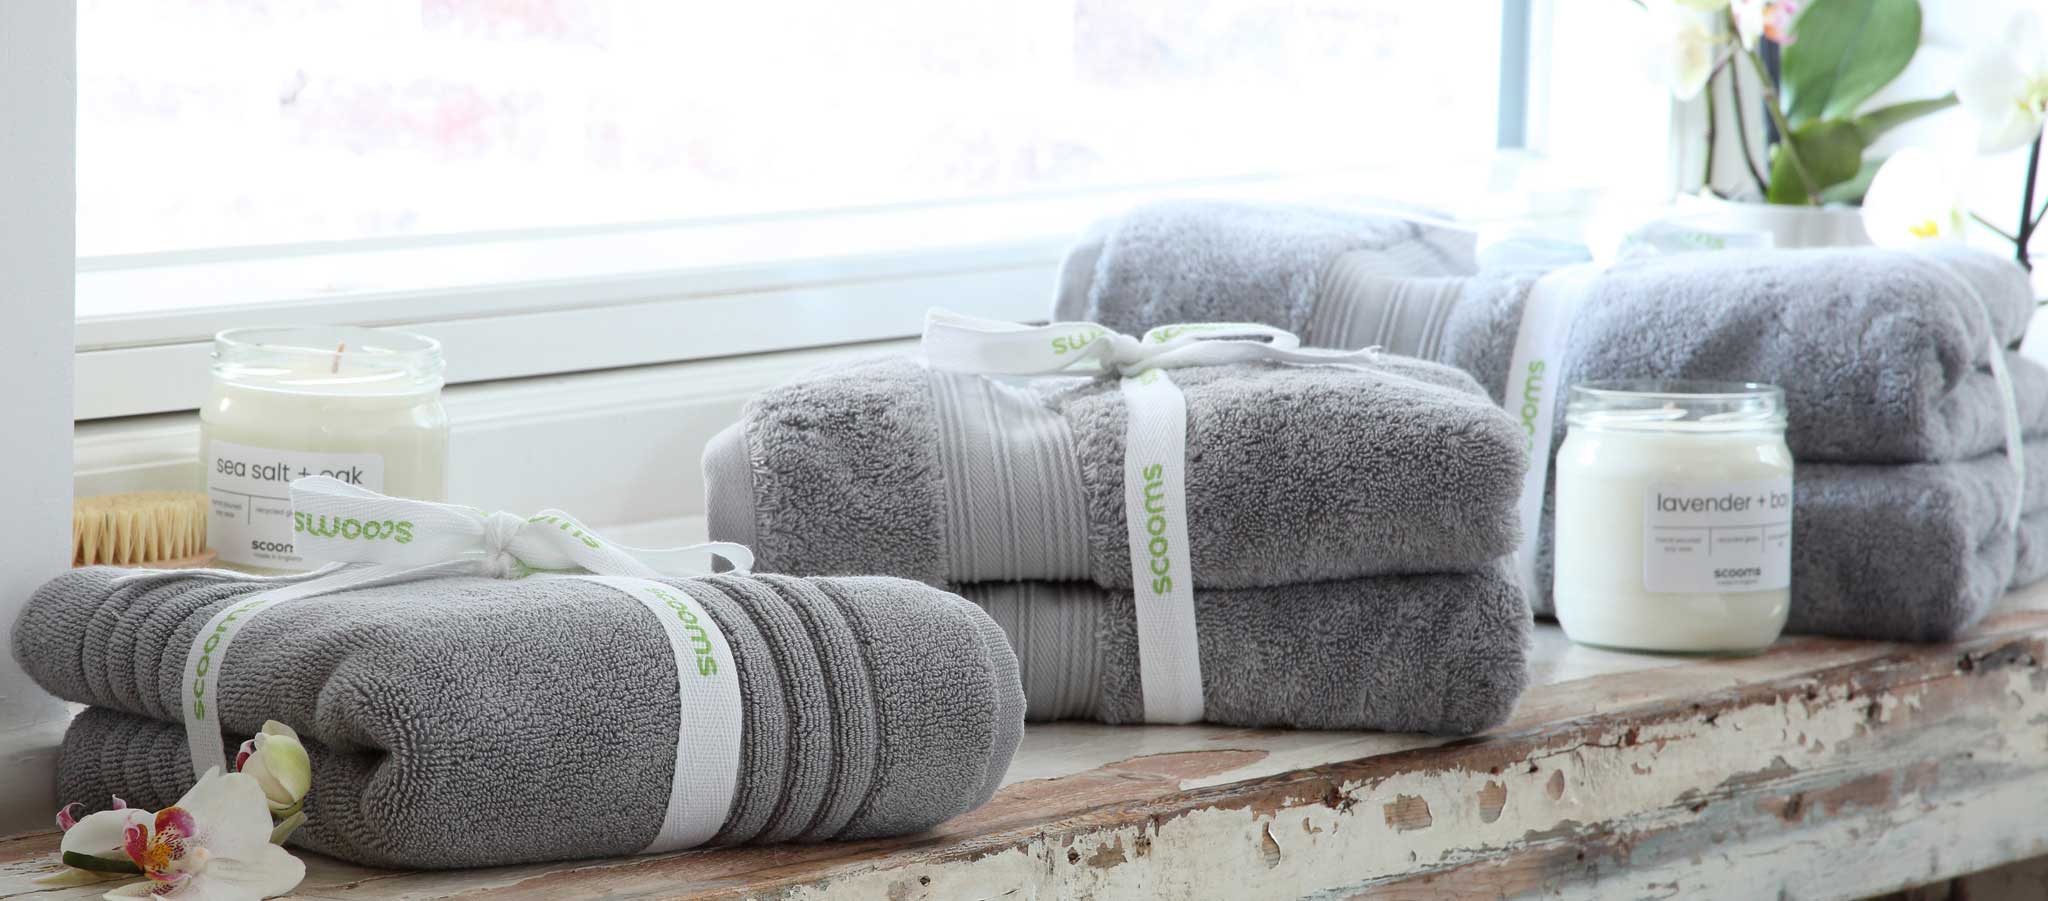 Egyptian Cotton Towels with Candles | scooms